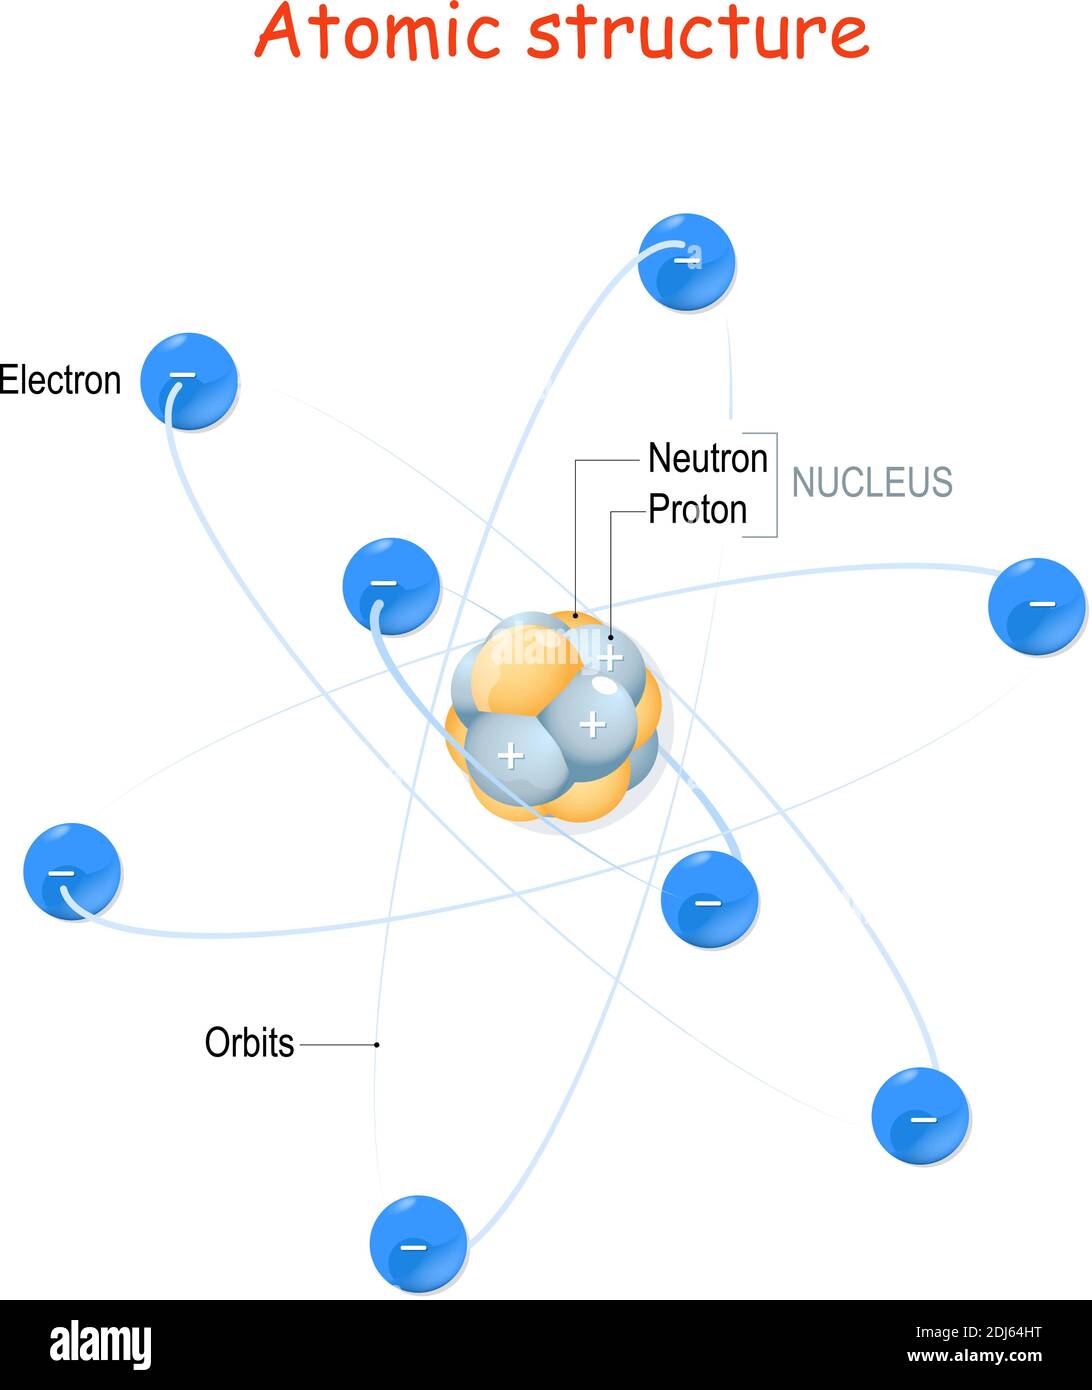 Atomic Structure. For example carbon atom. Nucleus with protons and neutrons, orbits of electrons. Vector illustration for educational use Stock Vector